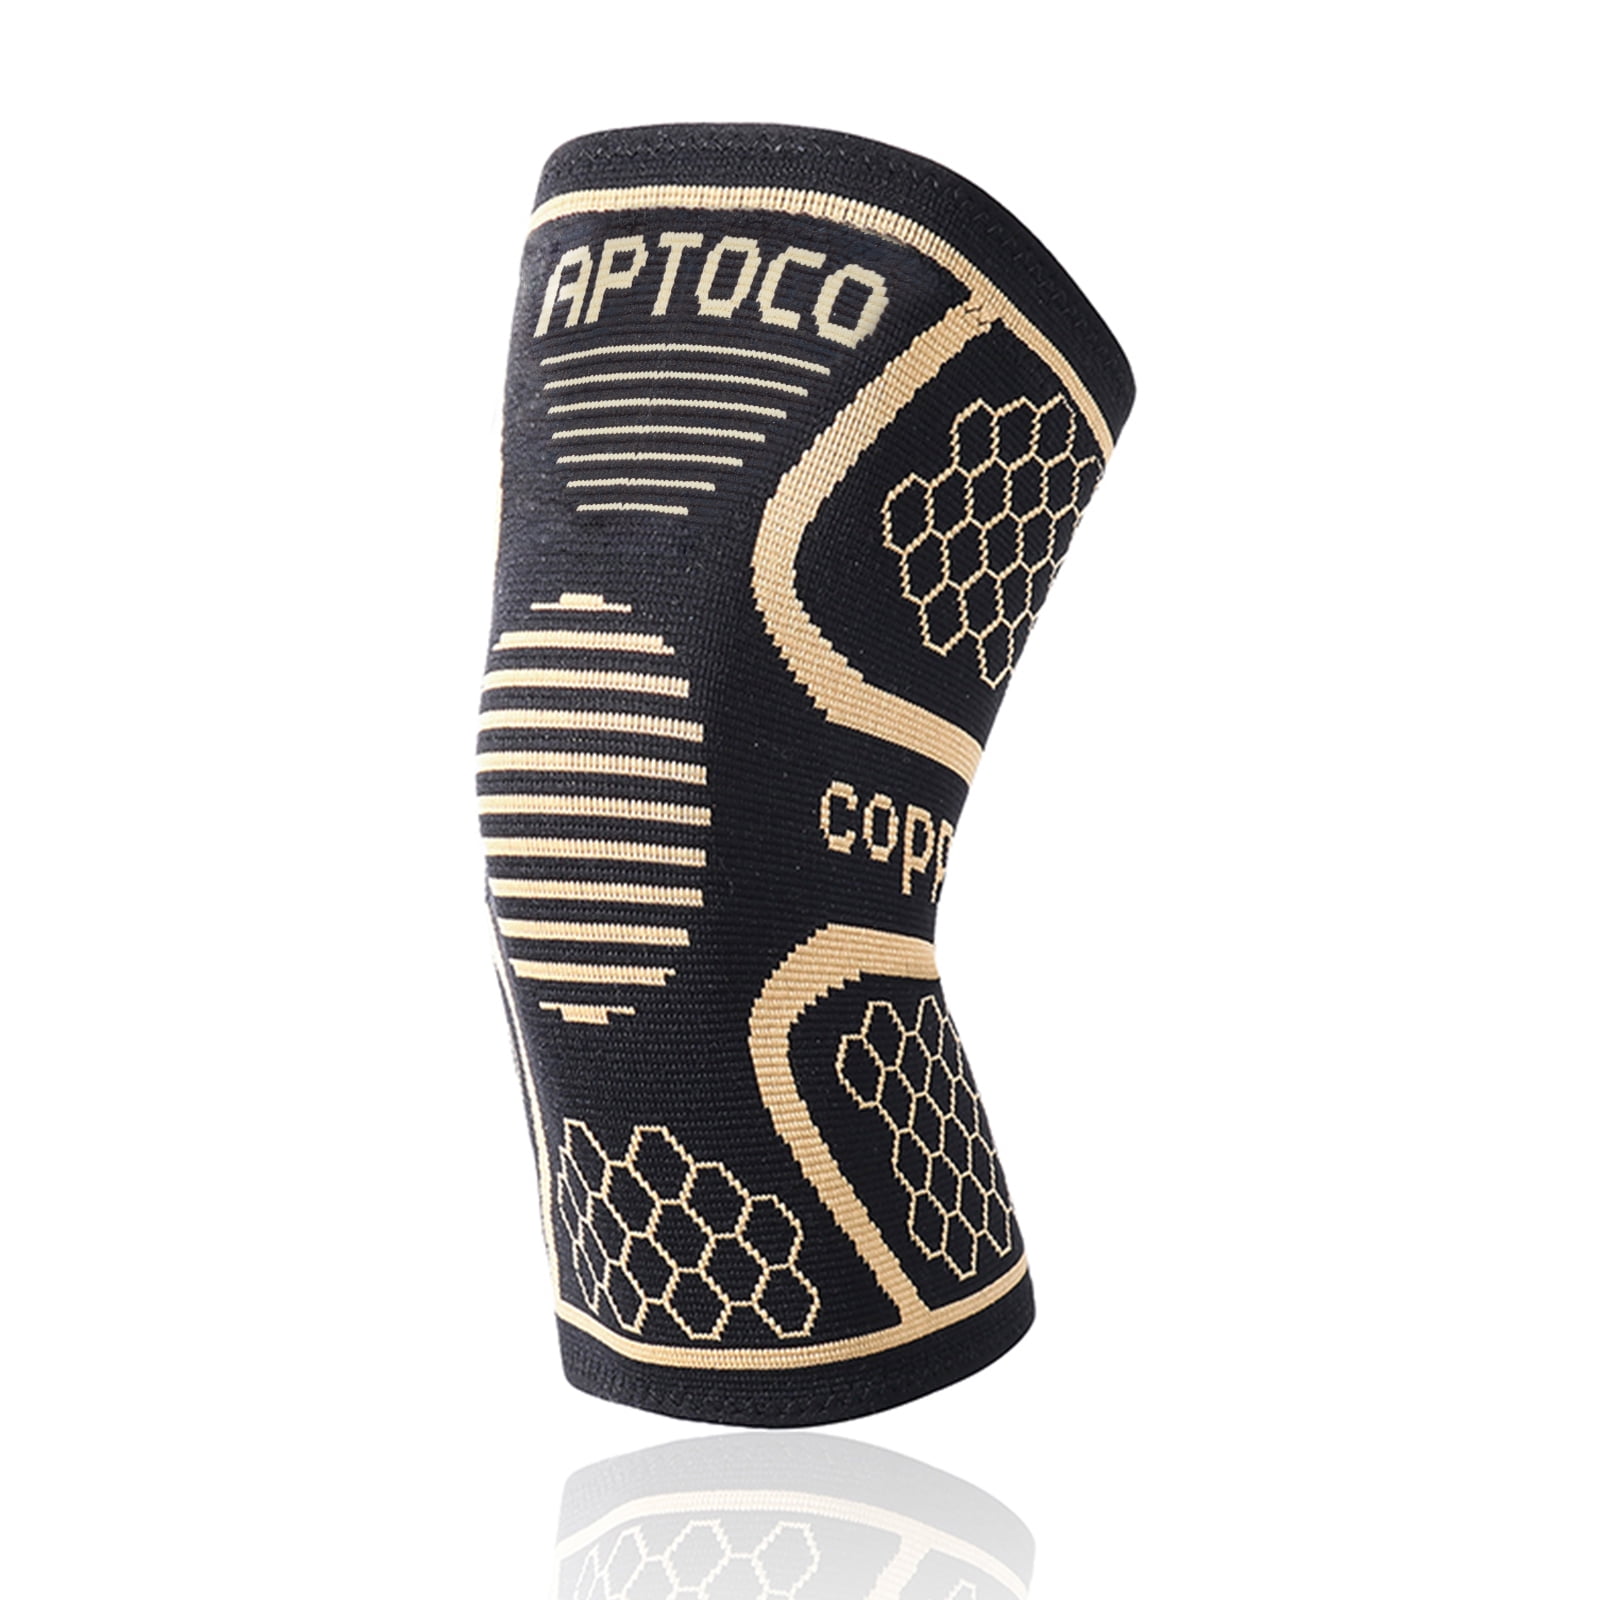 Aptoco Copper Knee Brace Knee Compression Sleeve for Joint